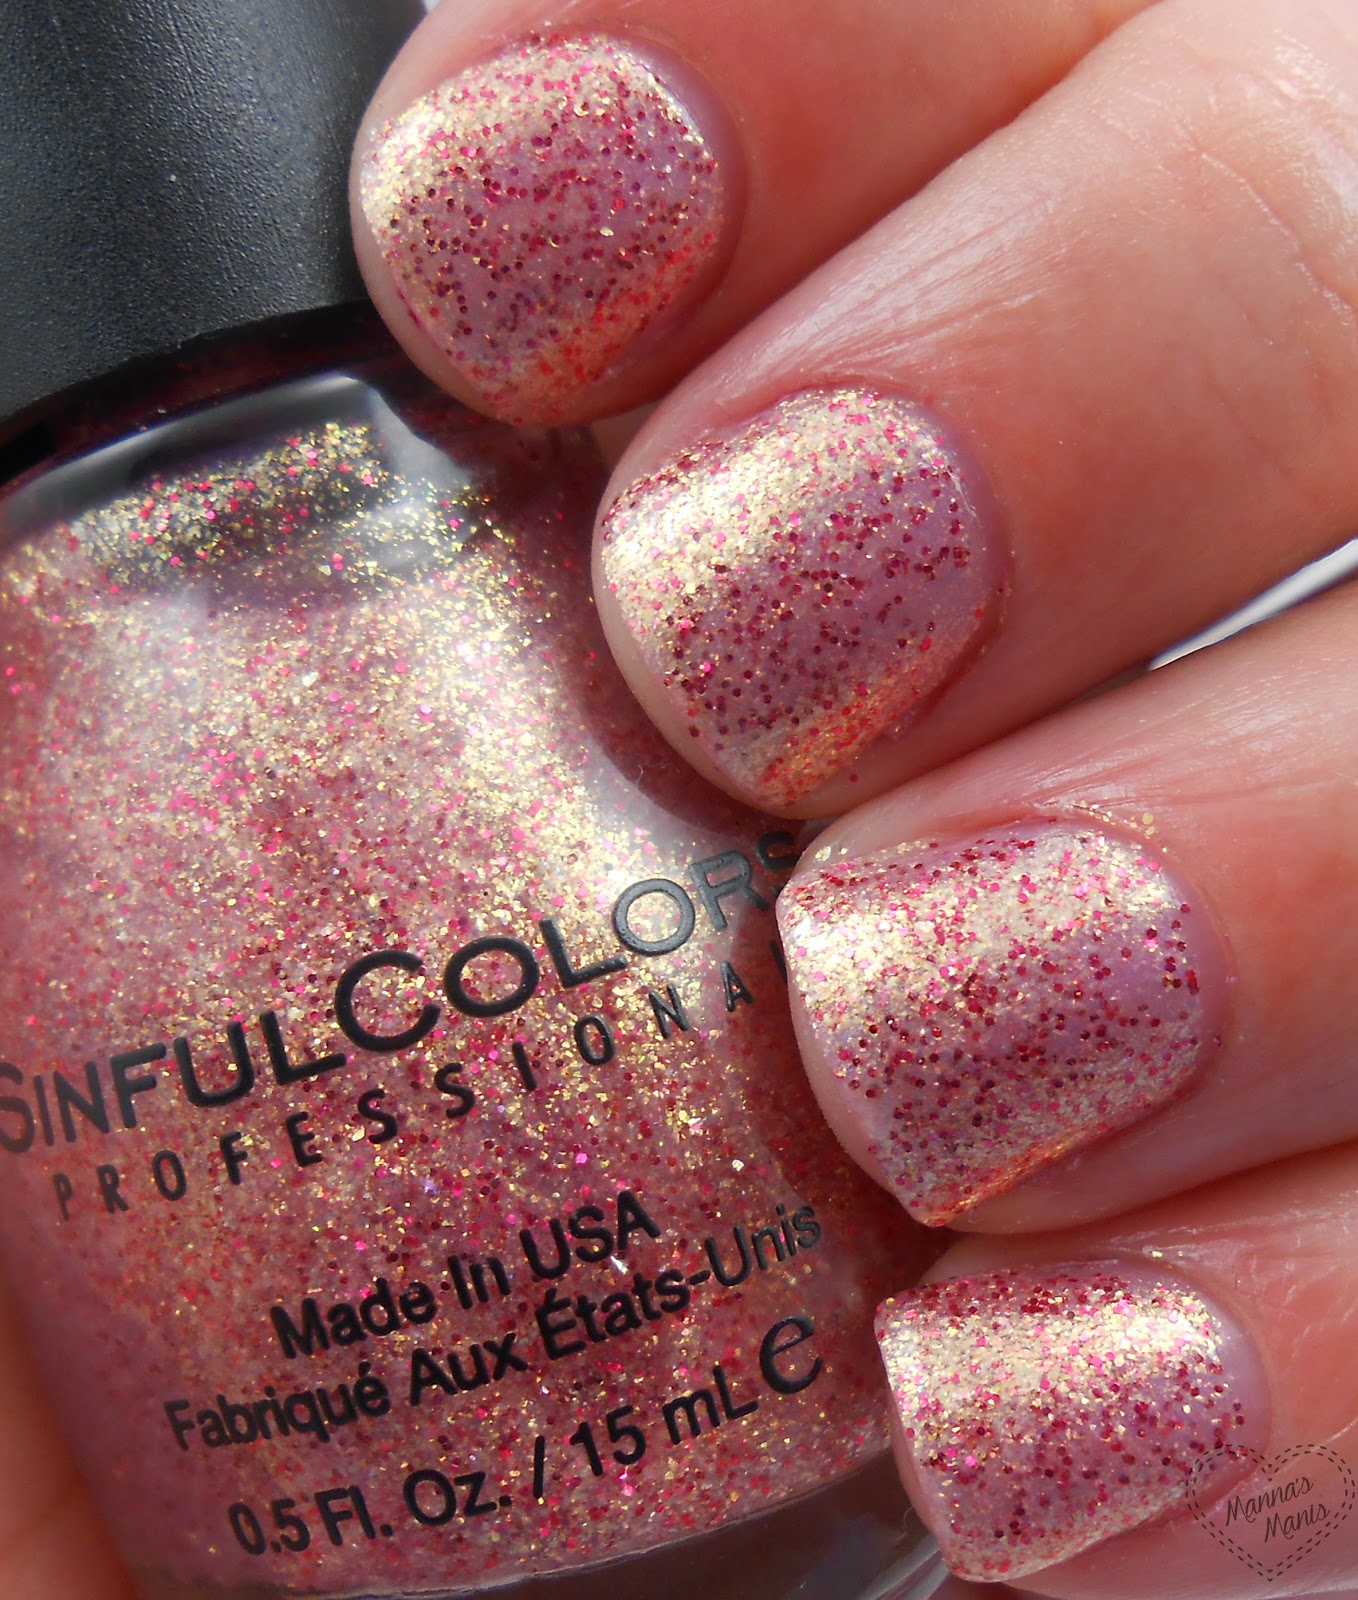 sinful colors glided, a shimmery gold and red nail polish